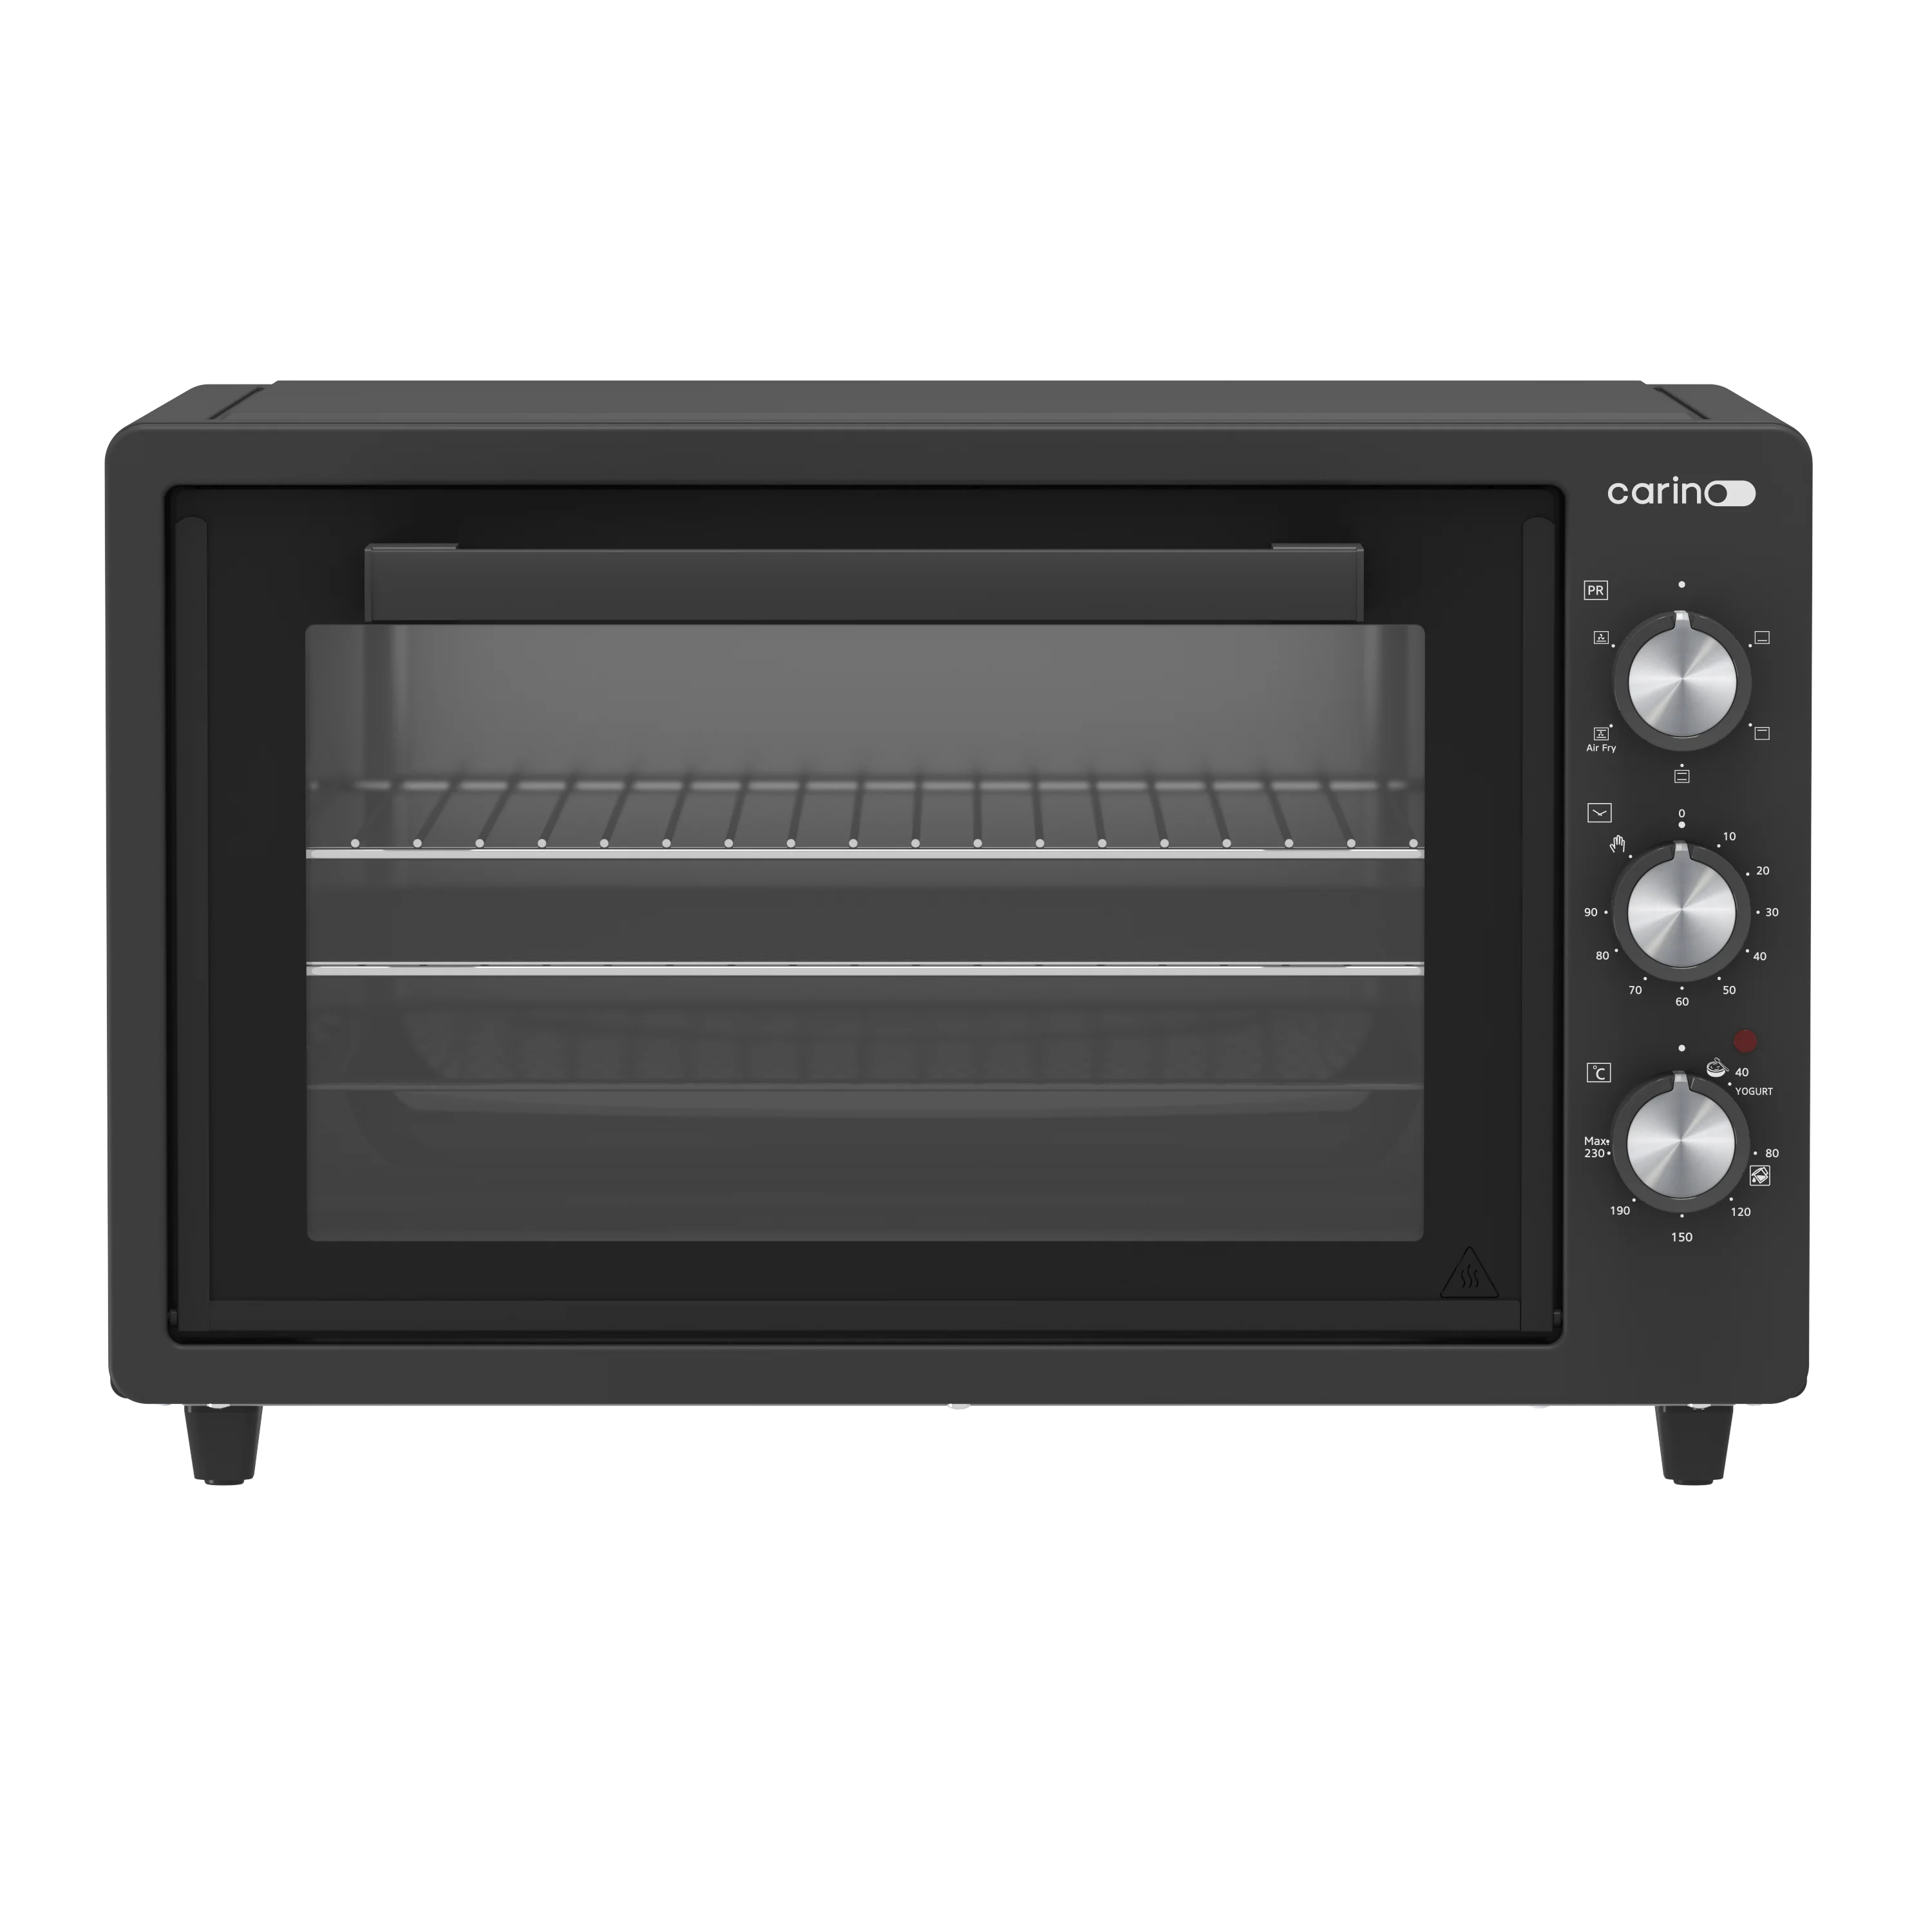 Vooravond poeder Om te mediteren 42 Liter Mini Oven 5 Functions Warm,Broil,Bake/toast,Airfry,Pizza  Anthracite Body,Airfry Basket Round Tray Double Glass - Buy Mini Oven  Toaster Oven Airfry Function Turbo Fan Mechanic Timer,0+5 Function 42 Liter  Electric Oven Double